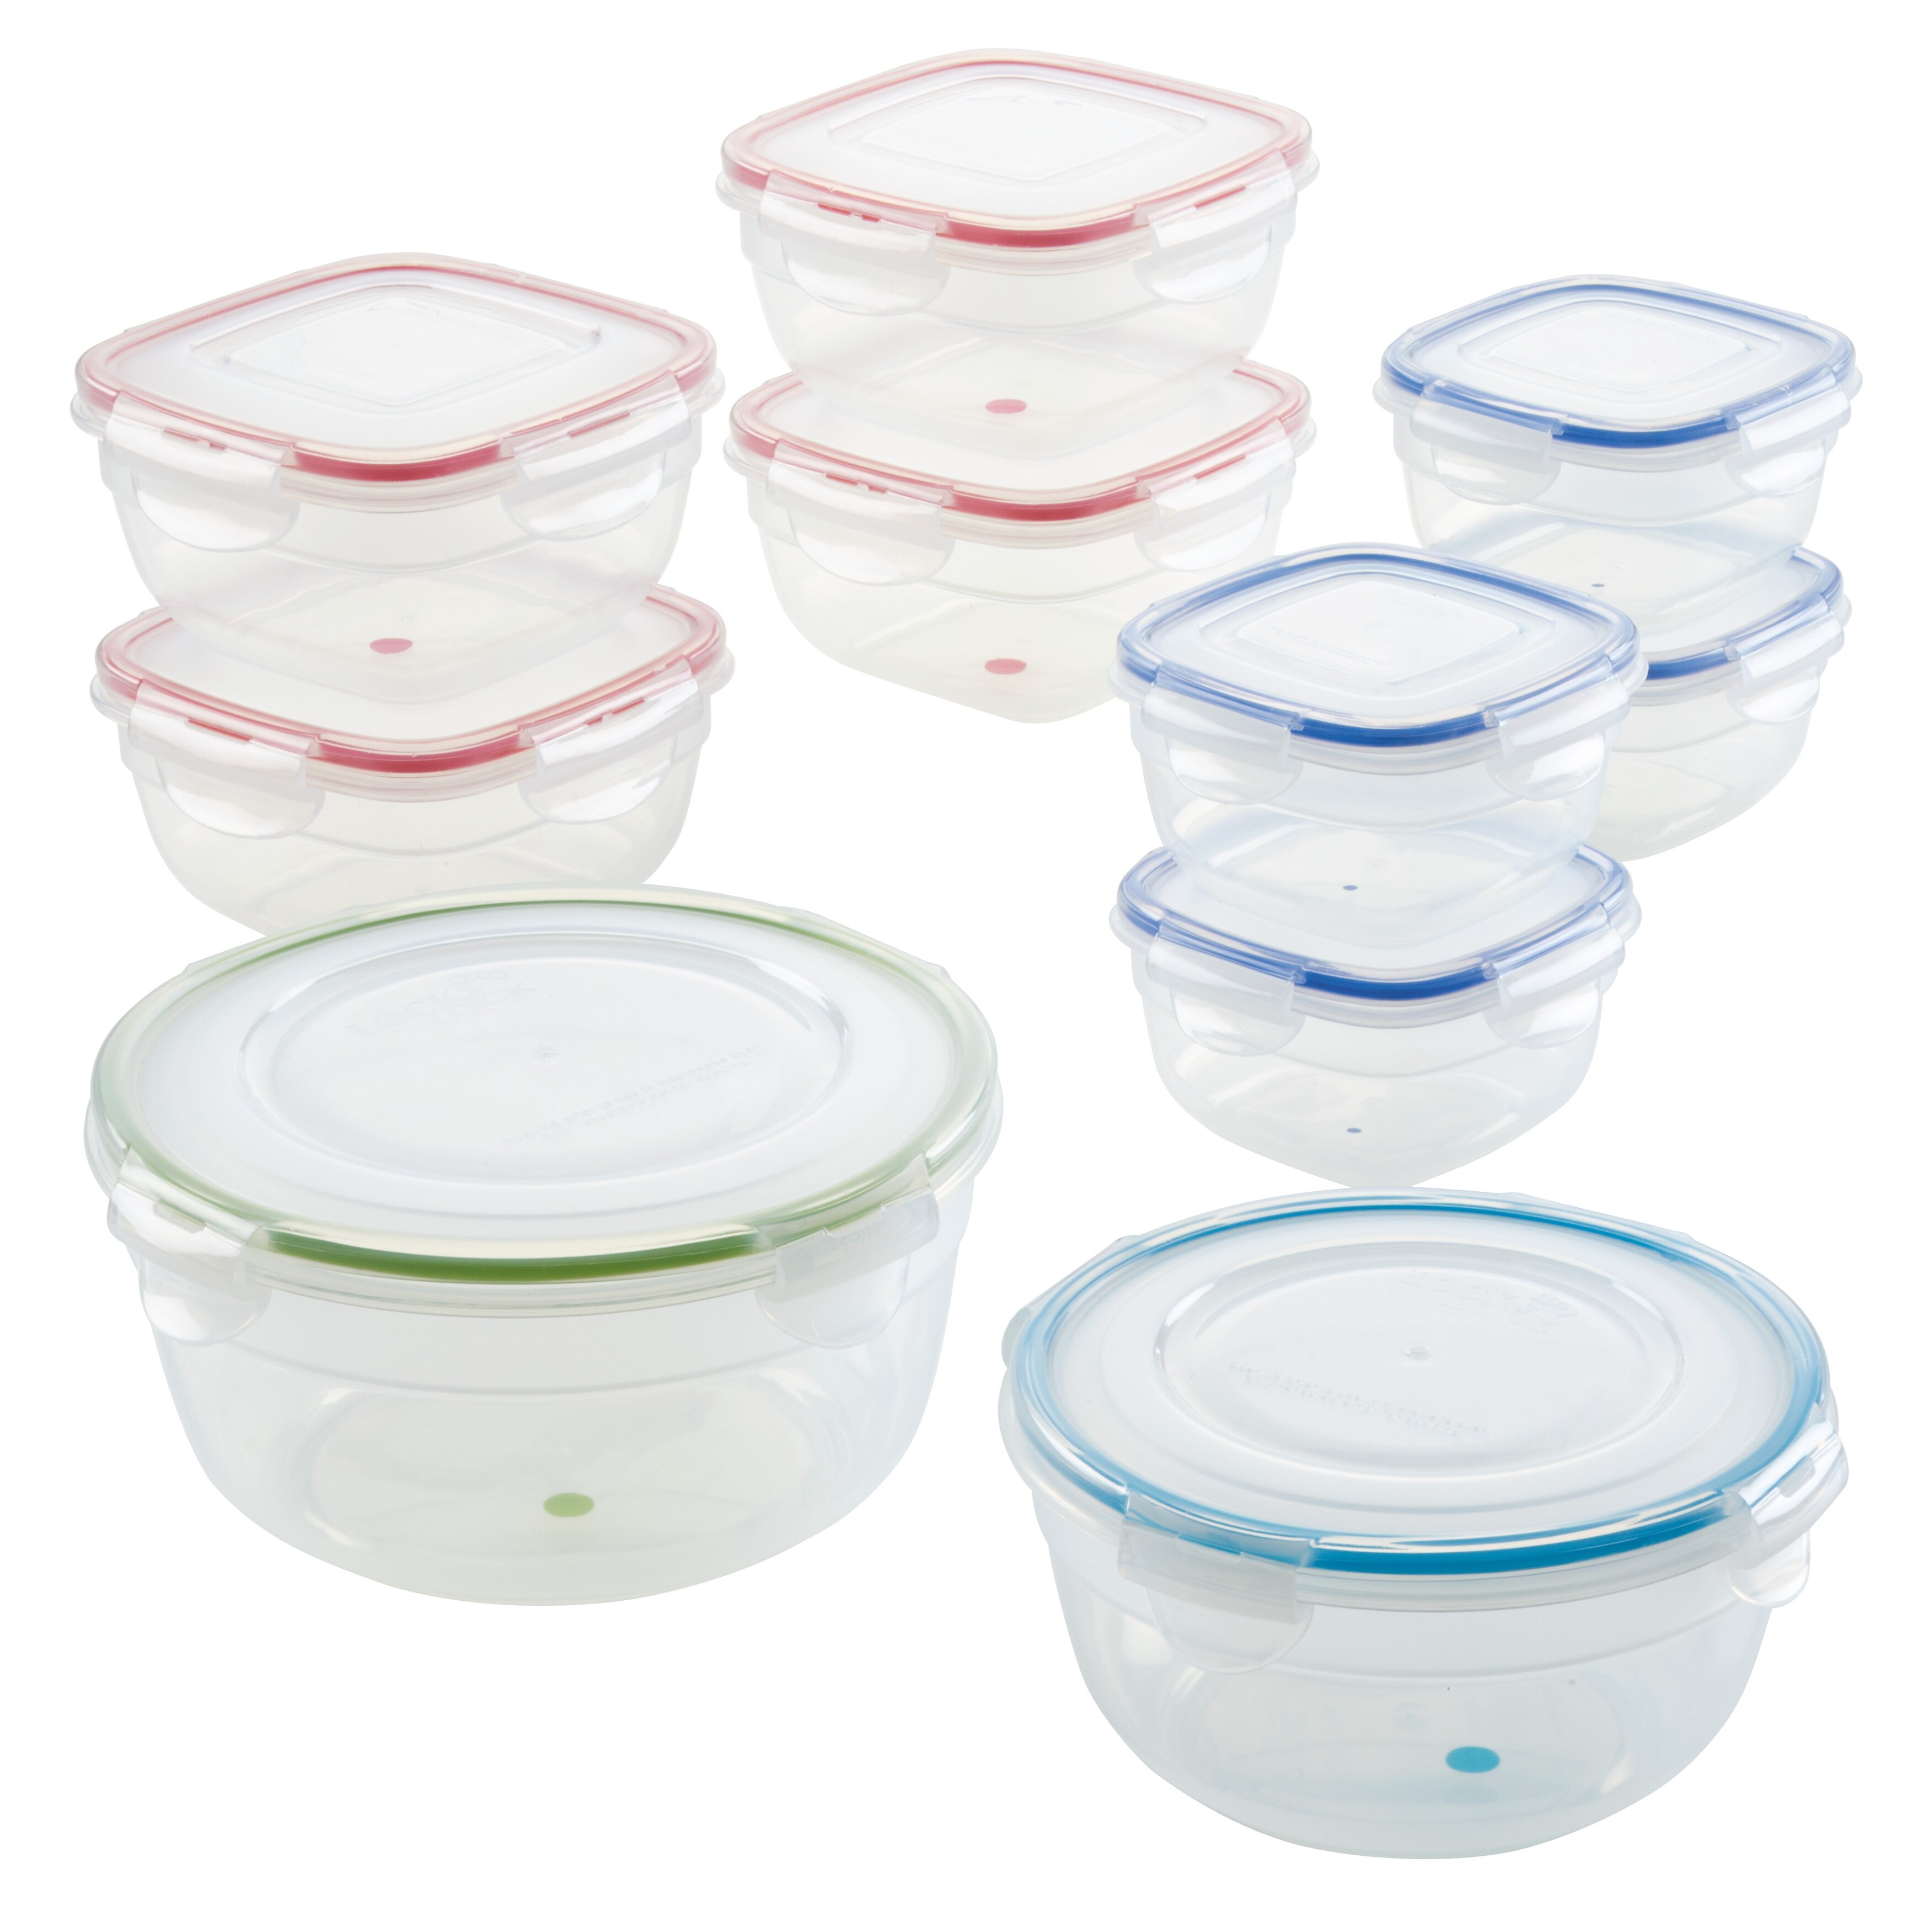 https://ak1.ostkcdn.com/images/products/is/images/direct/7ed60a81a5124d197a2129f23a351043bbc0fdc4/LocknLock-Easy-Essentials-Color-Mates-Food-Storage-Set%2C-20pc.jpg